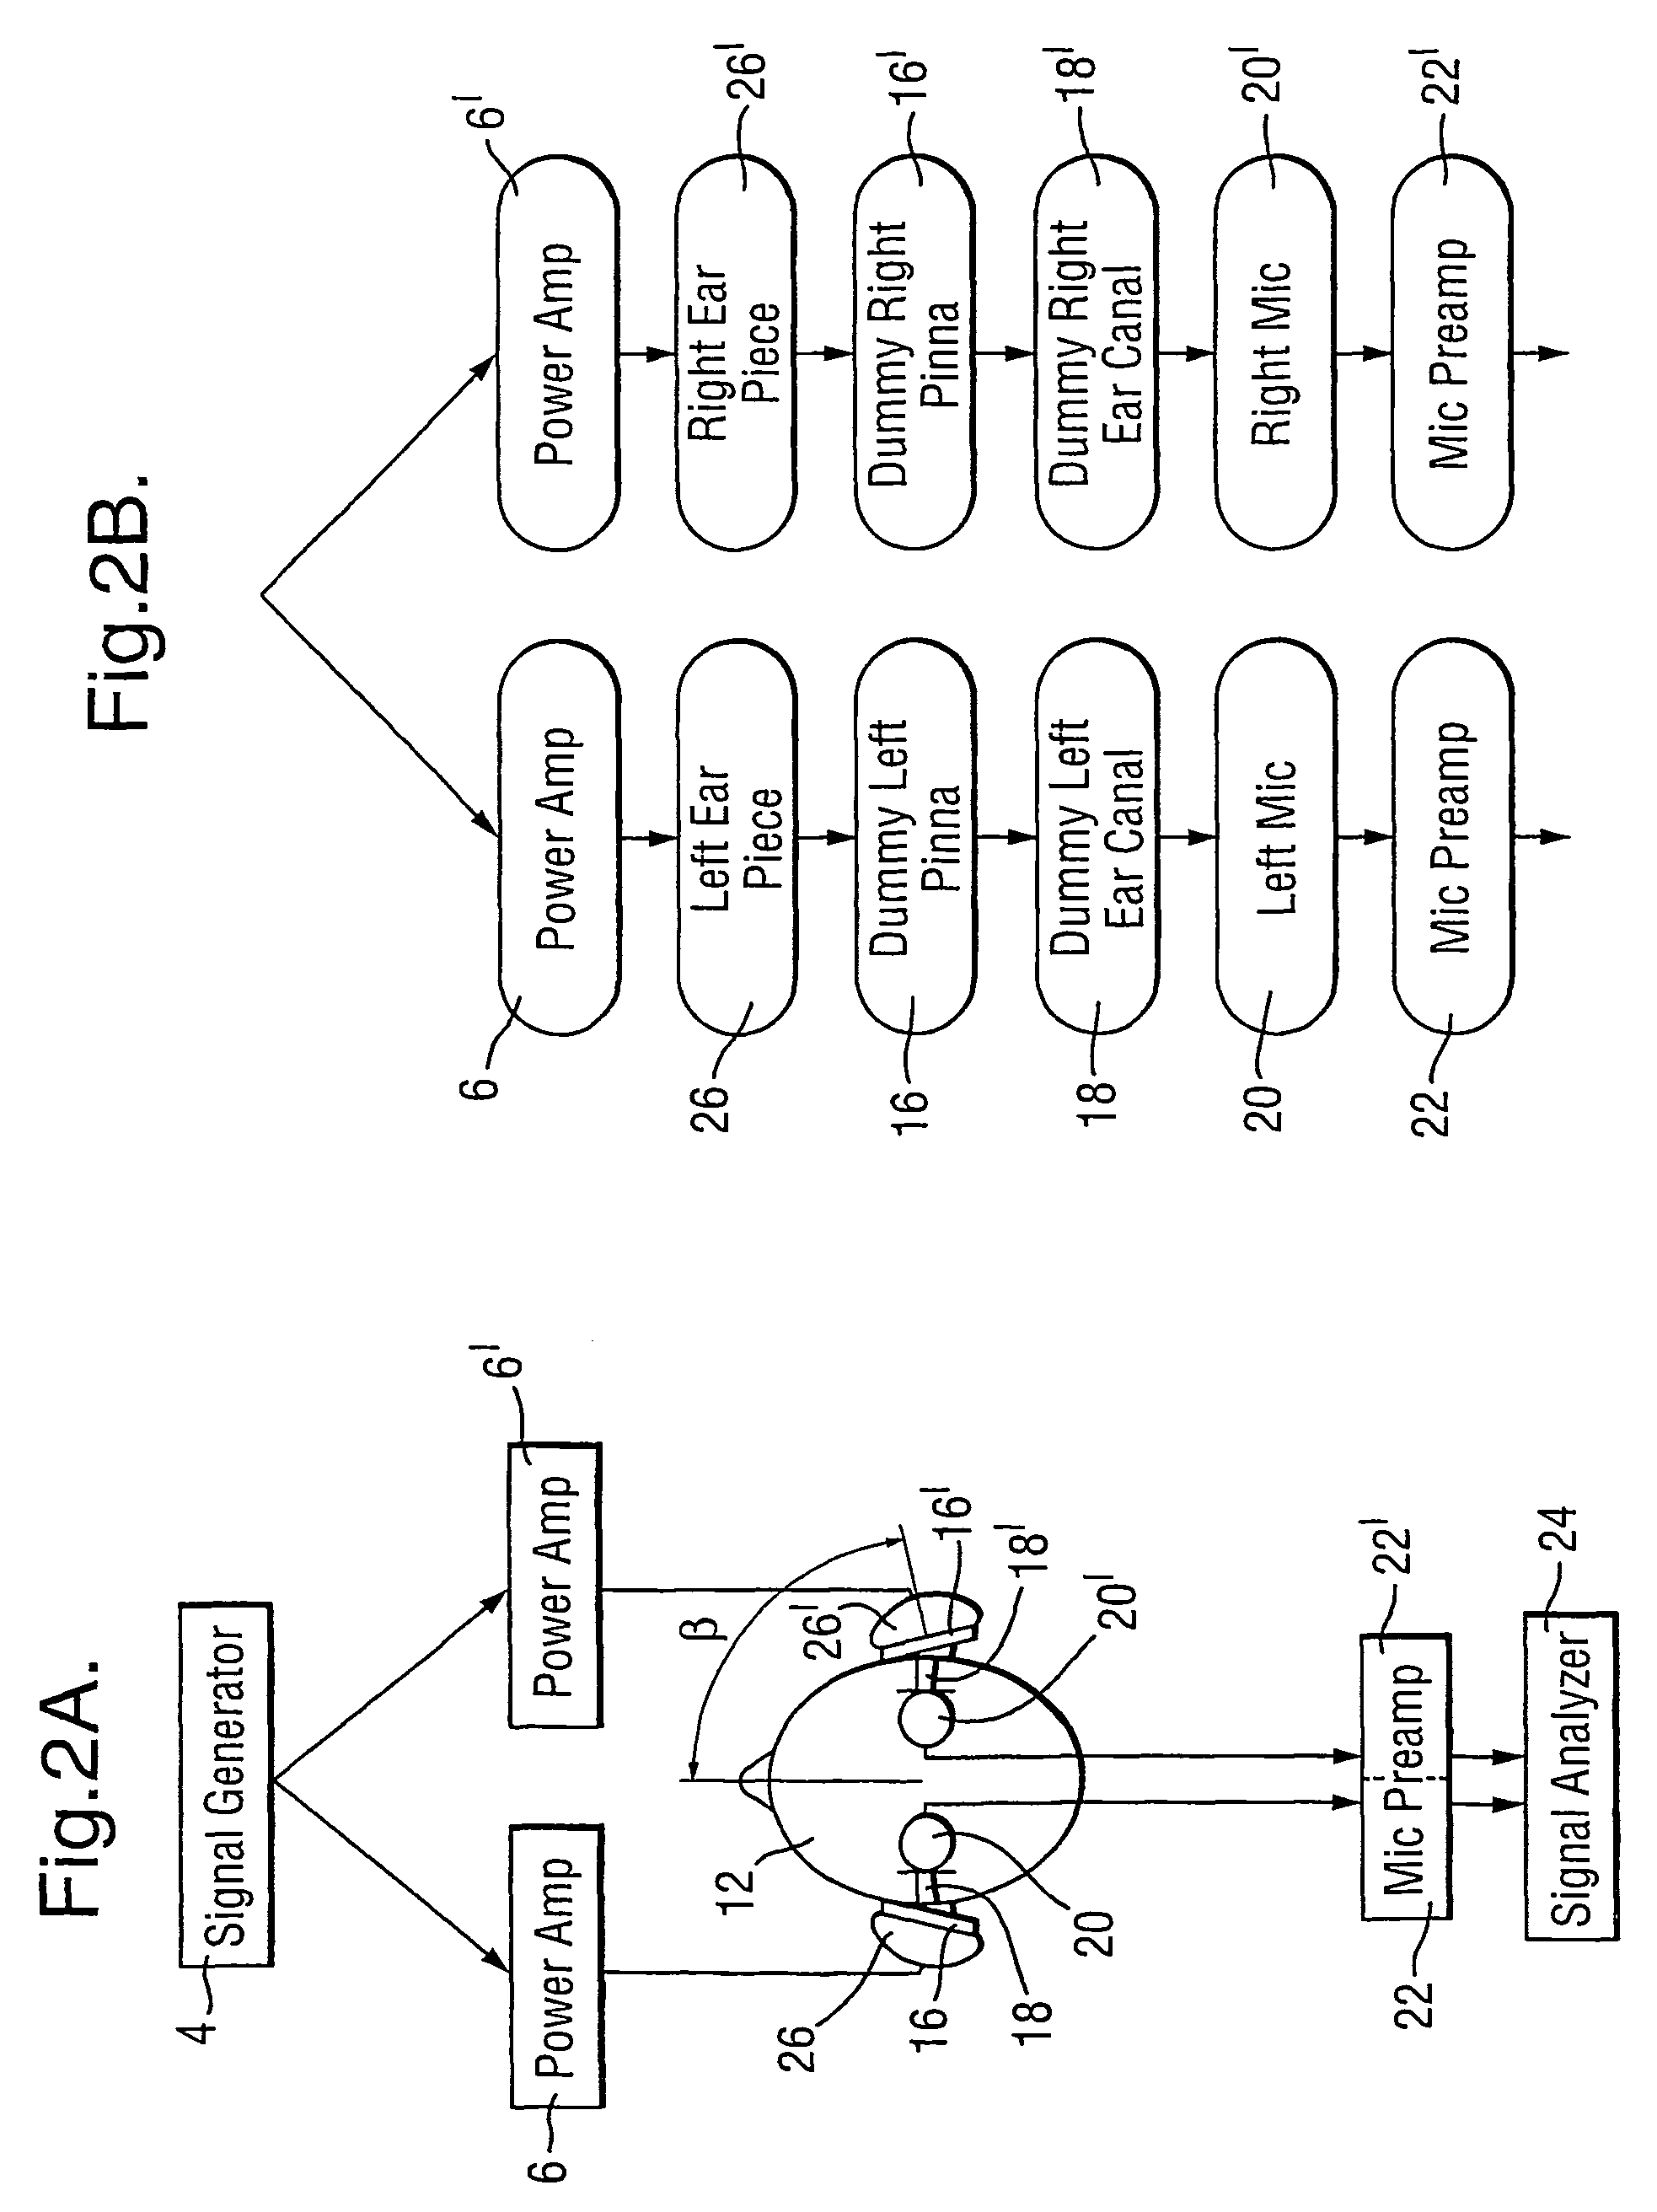 Method and system for simulating a 3D sound environment